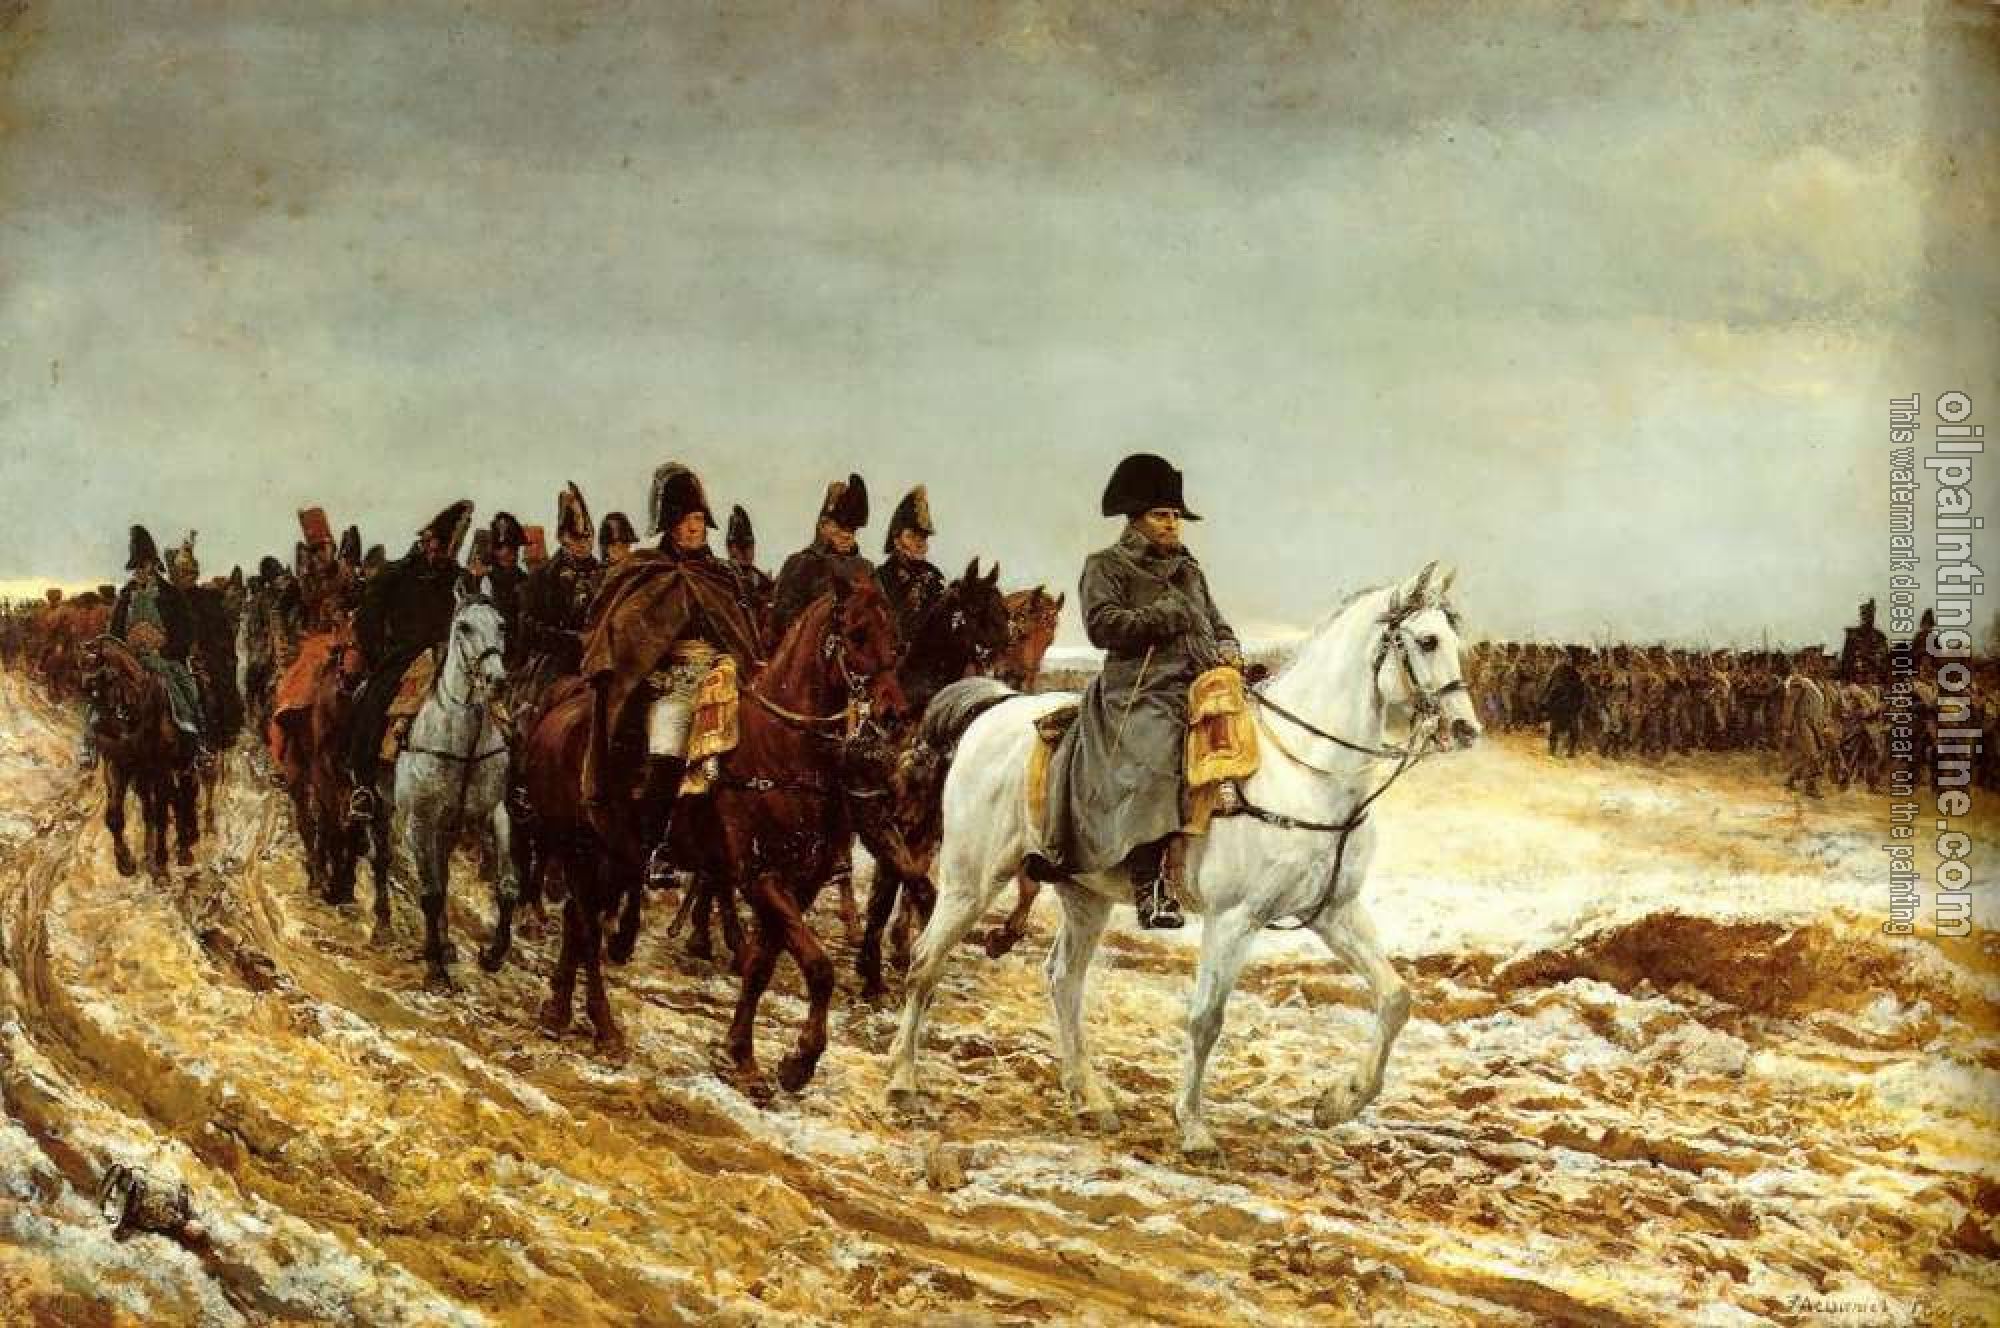 Meissonier, Jean-Louis Ernest - The French Campaign